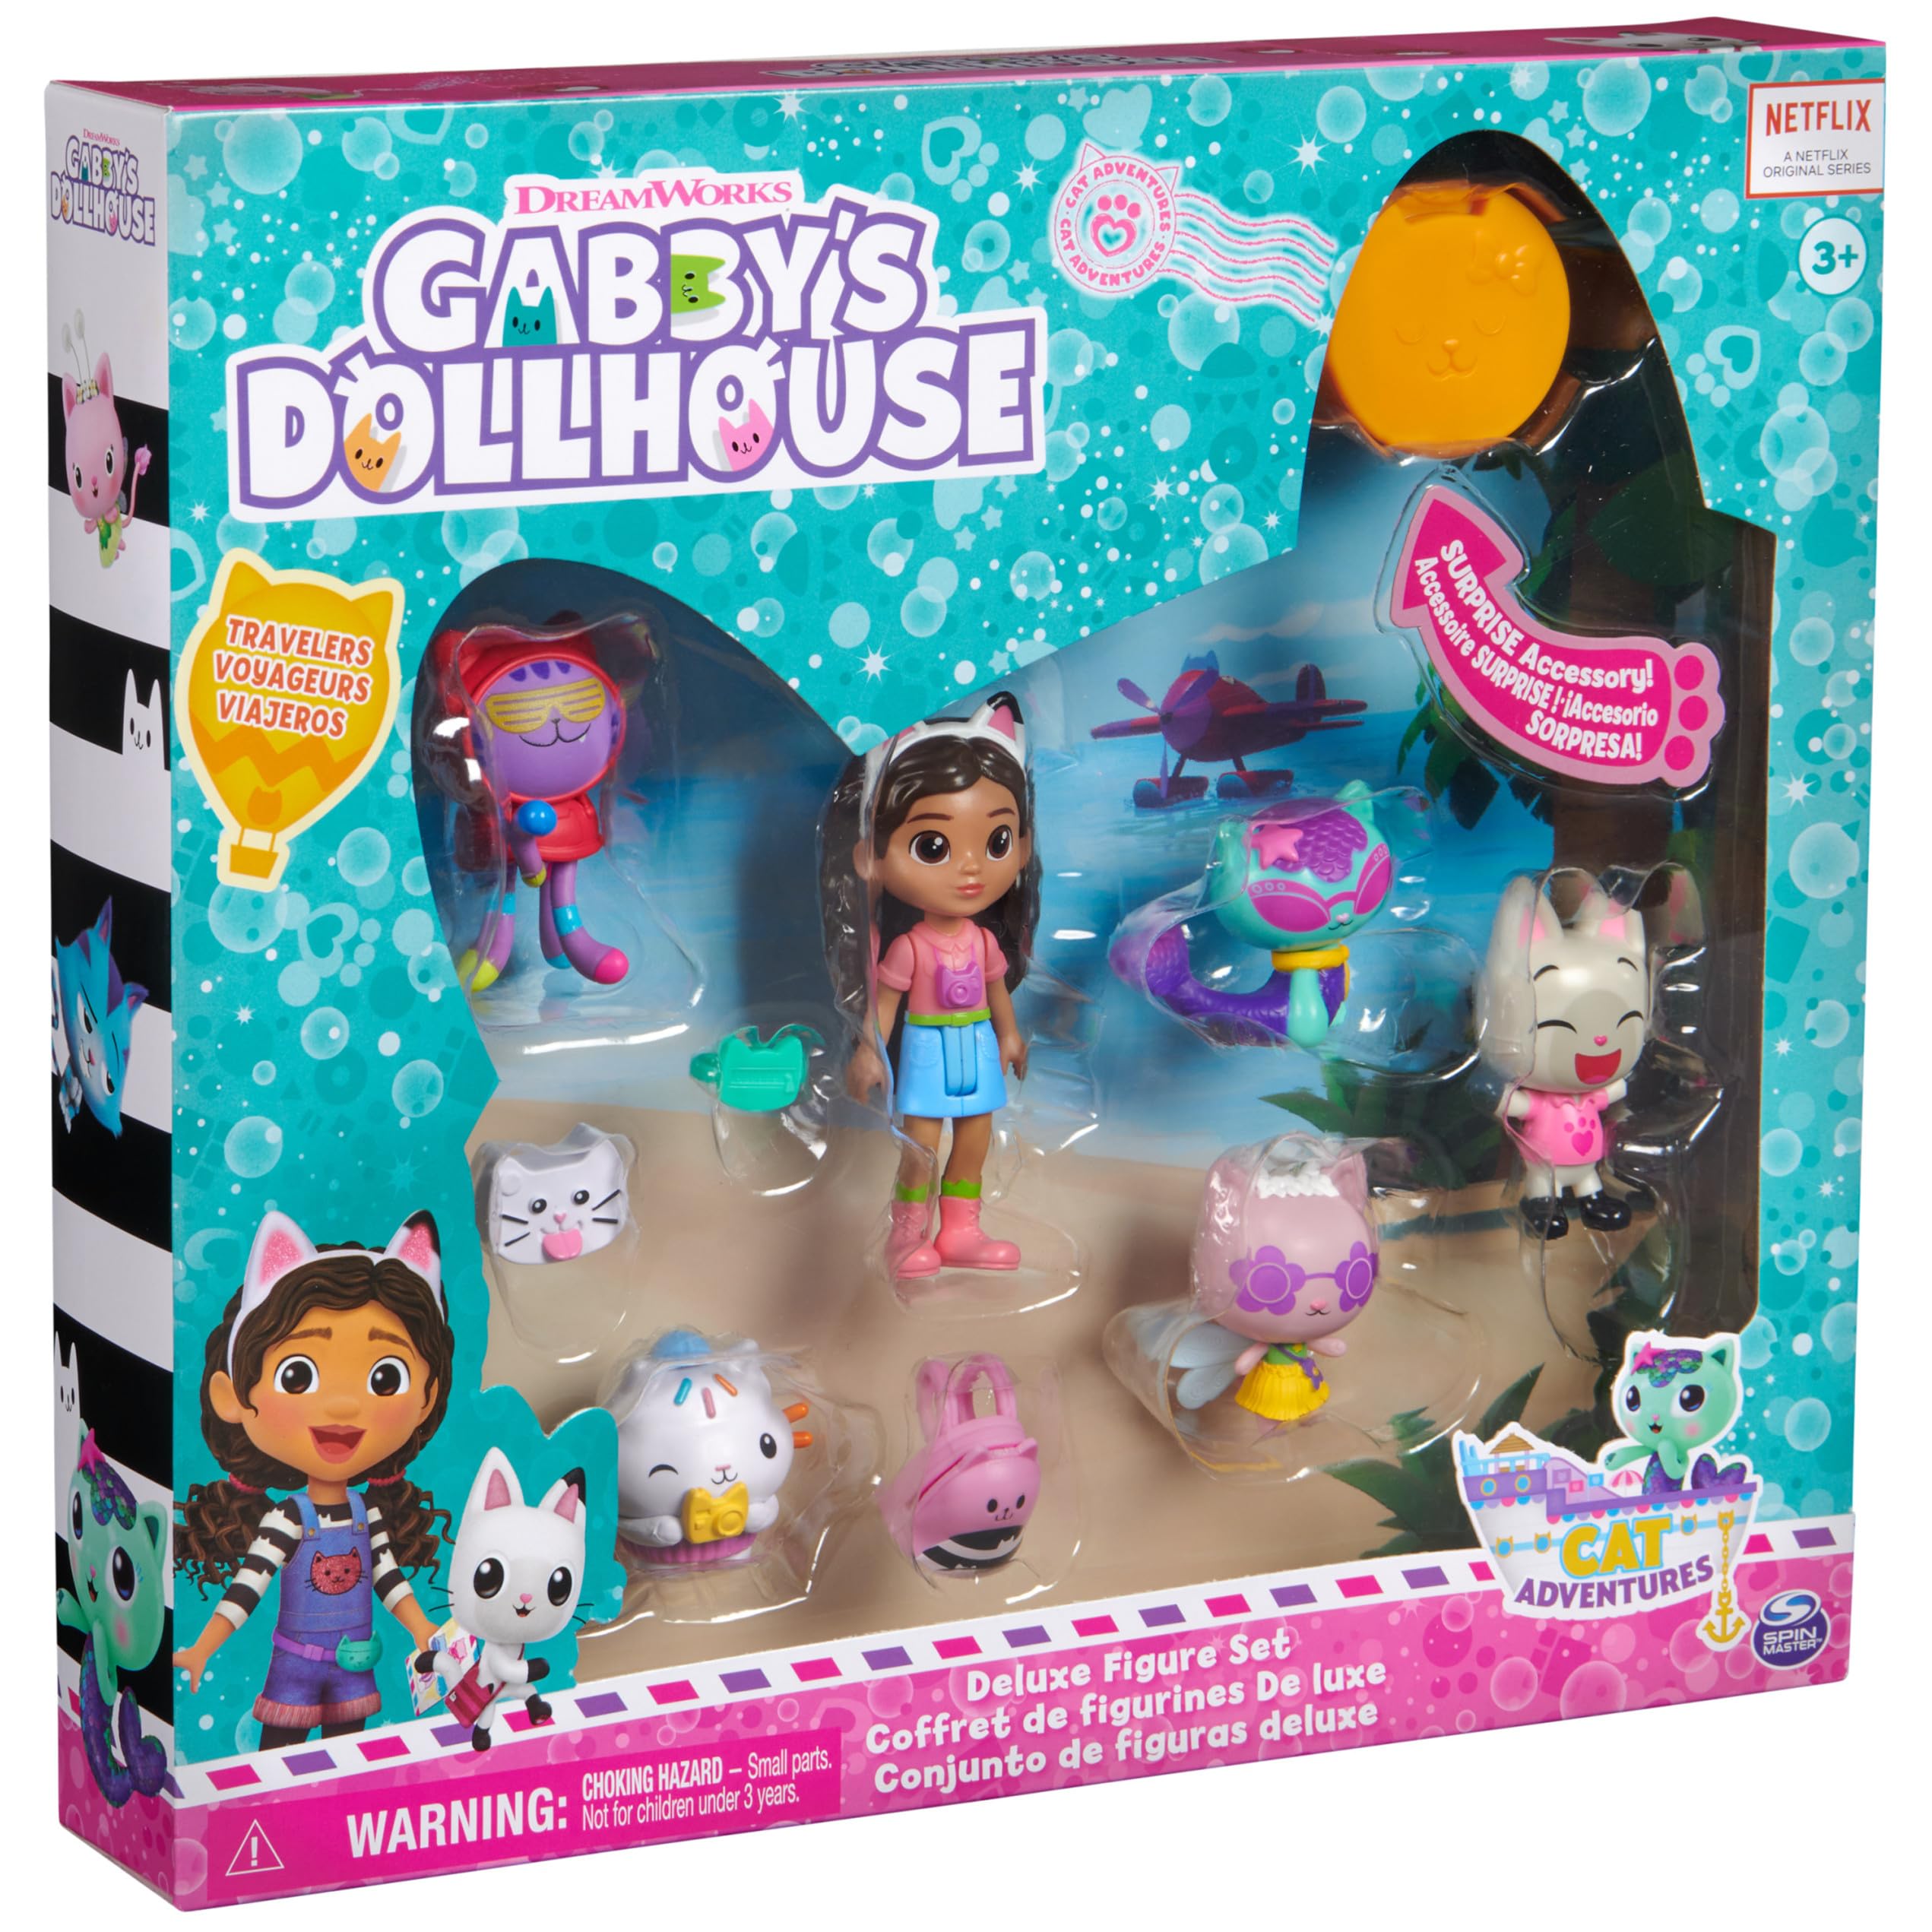 Gabby's Dollhouse, Travel Themed Figure Set with a Gabby Doll, 5 Cat Toy Figures, Surprise Toys & Dollhouse Accessories, Kids Toys for Girls & Boys 3+